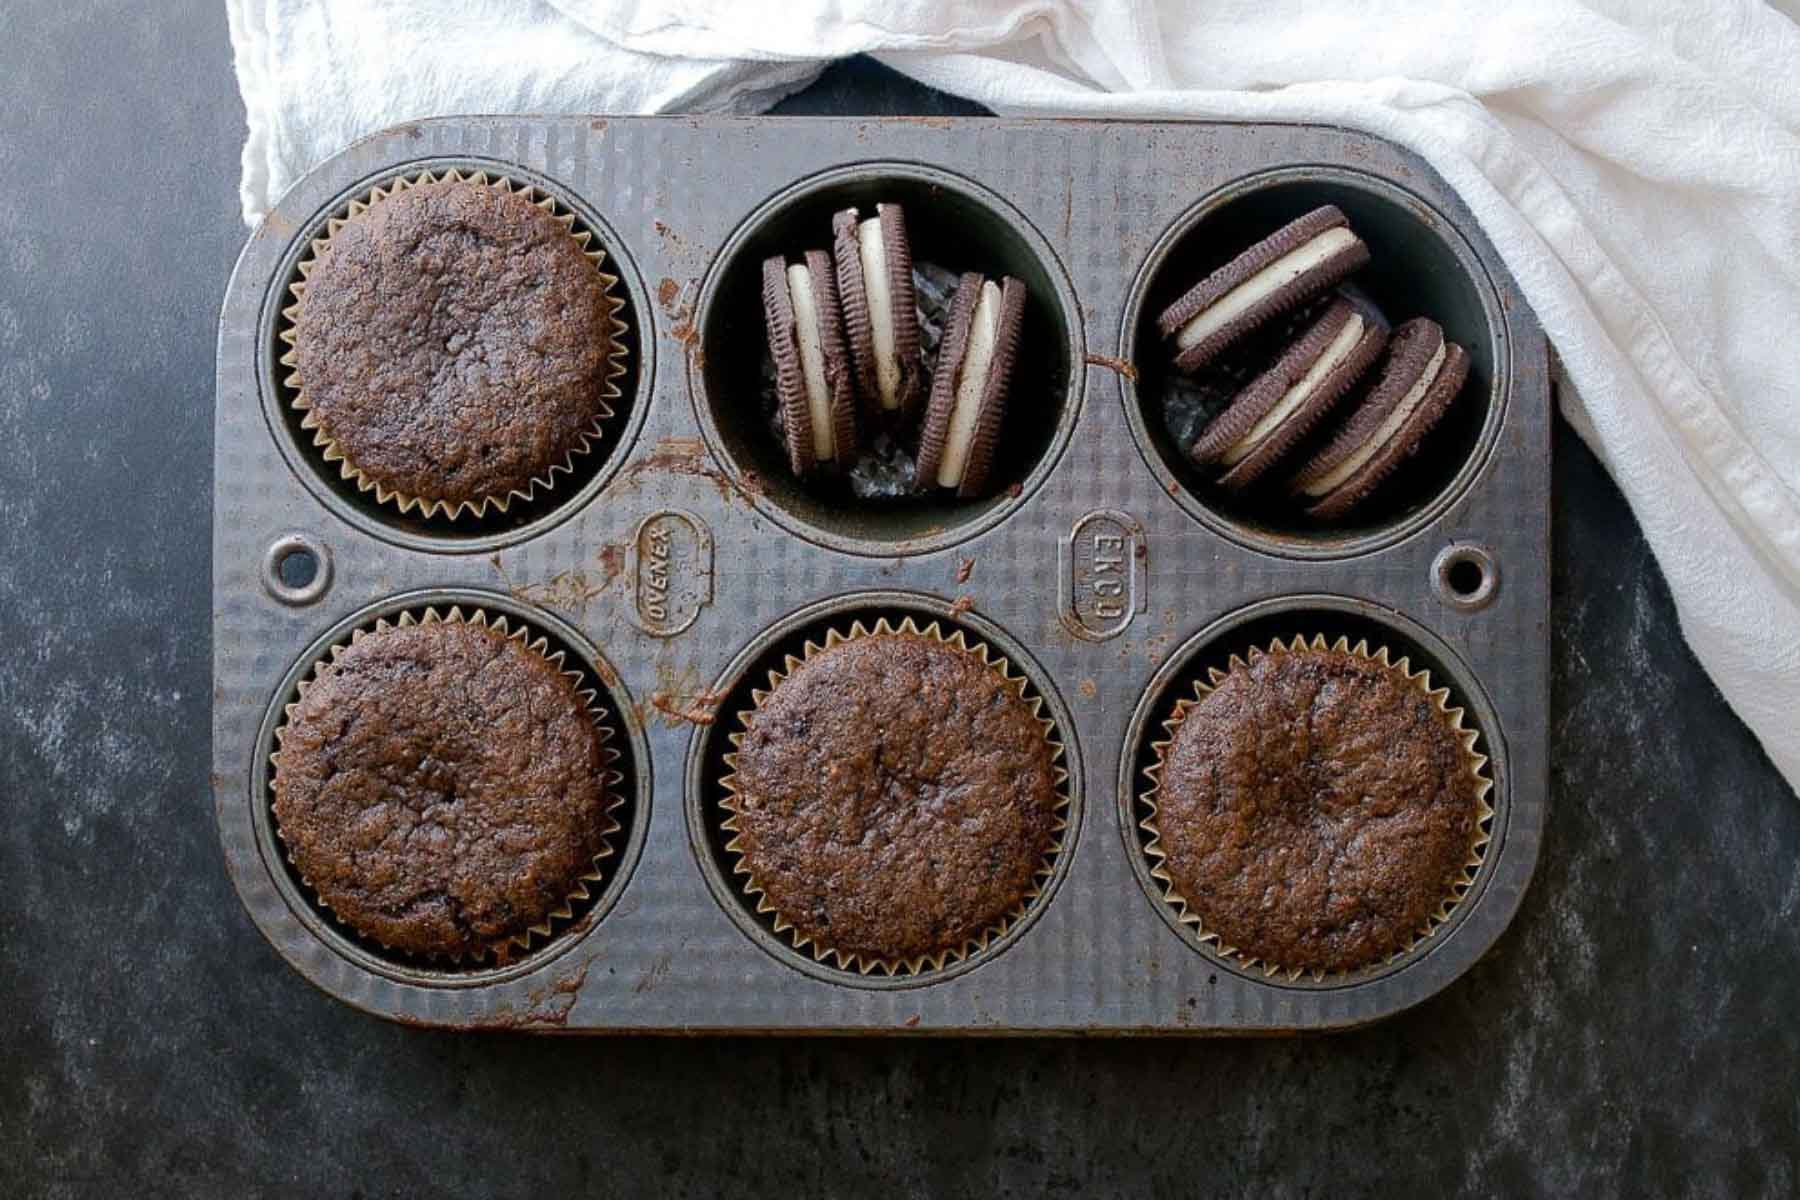 Four chocolate cupcakes in a pan with Oreo cookies in the other holes.